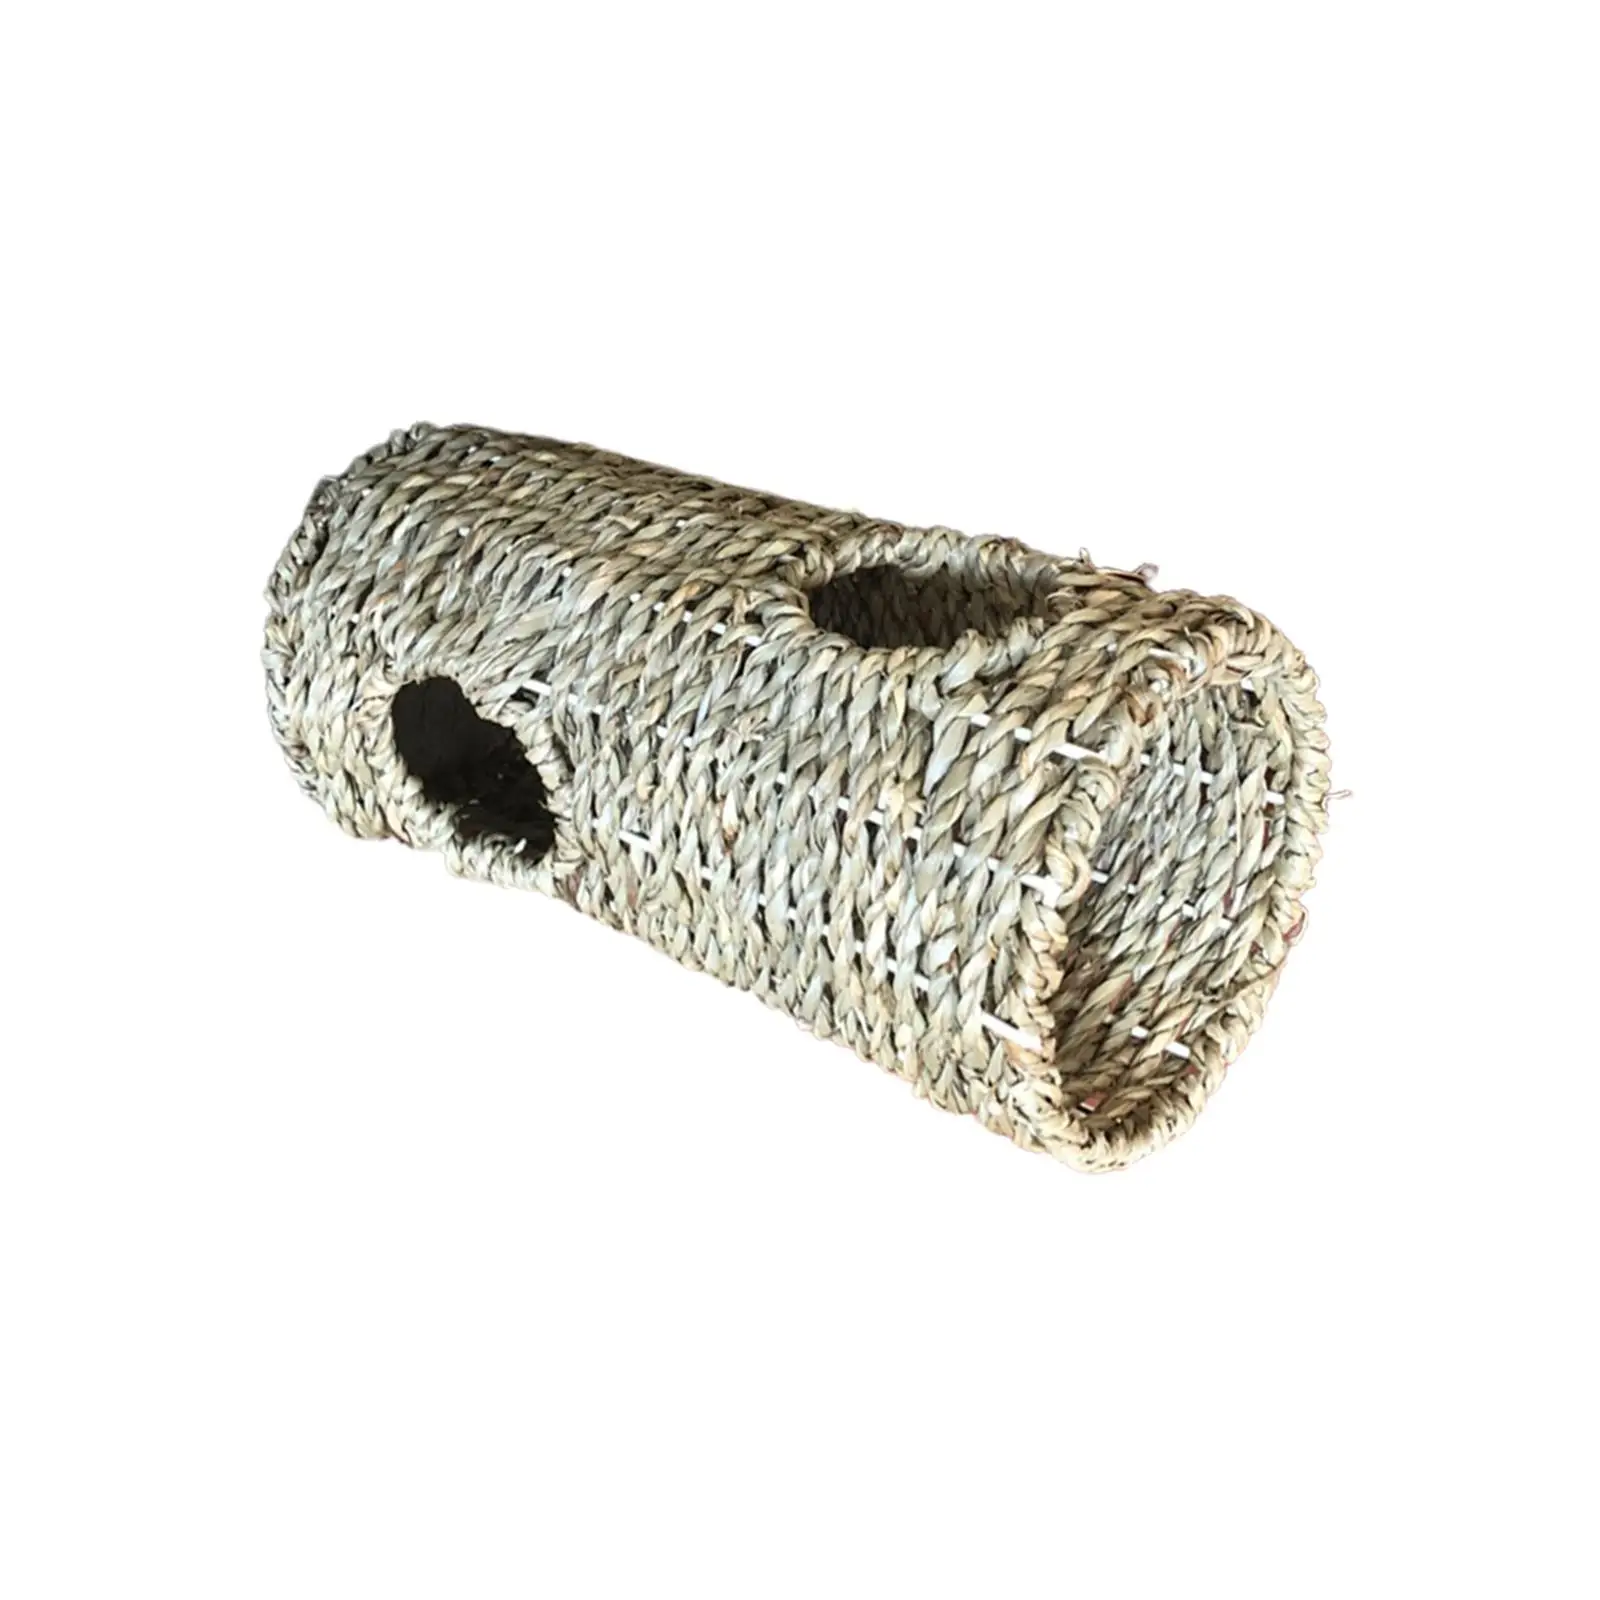 Hamster Grass Tunnel Durable Lightweight Tube Burrow House Straw Tunnel for Hamster Hedgehog Mice Ferrets Small Sized Animals